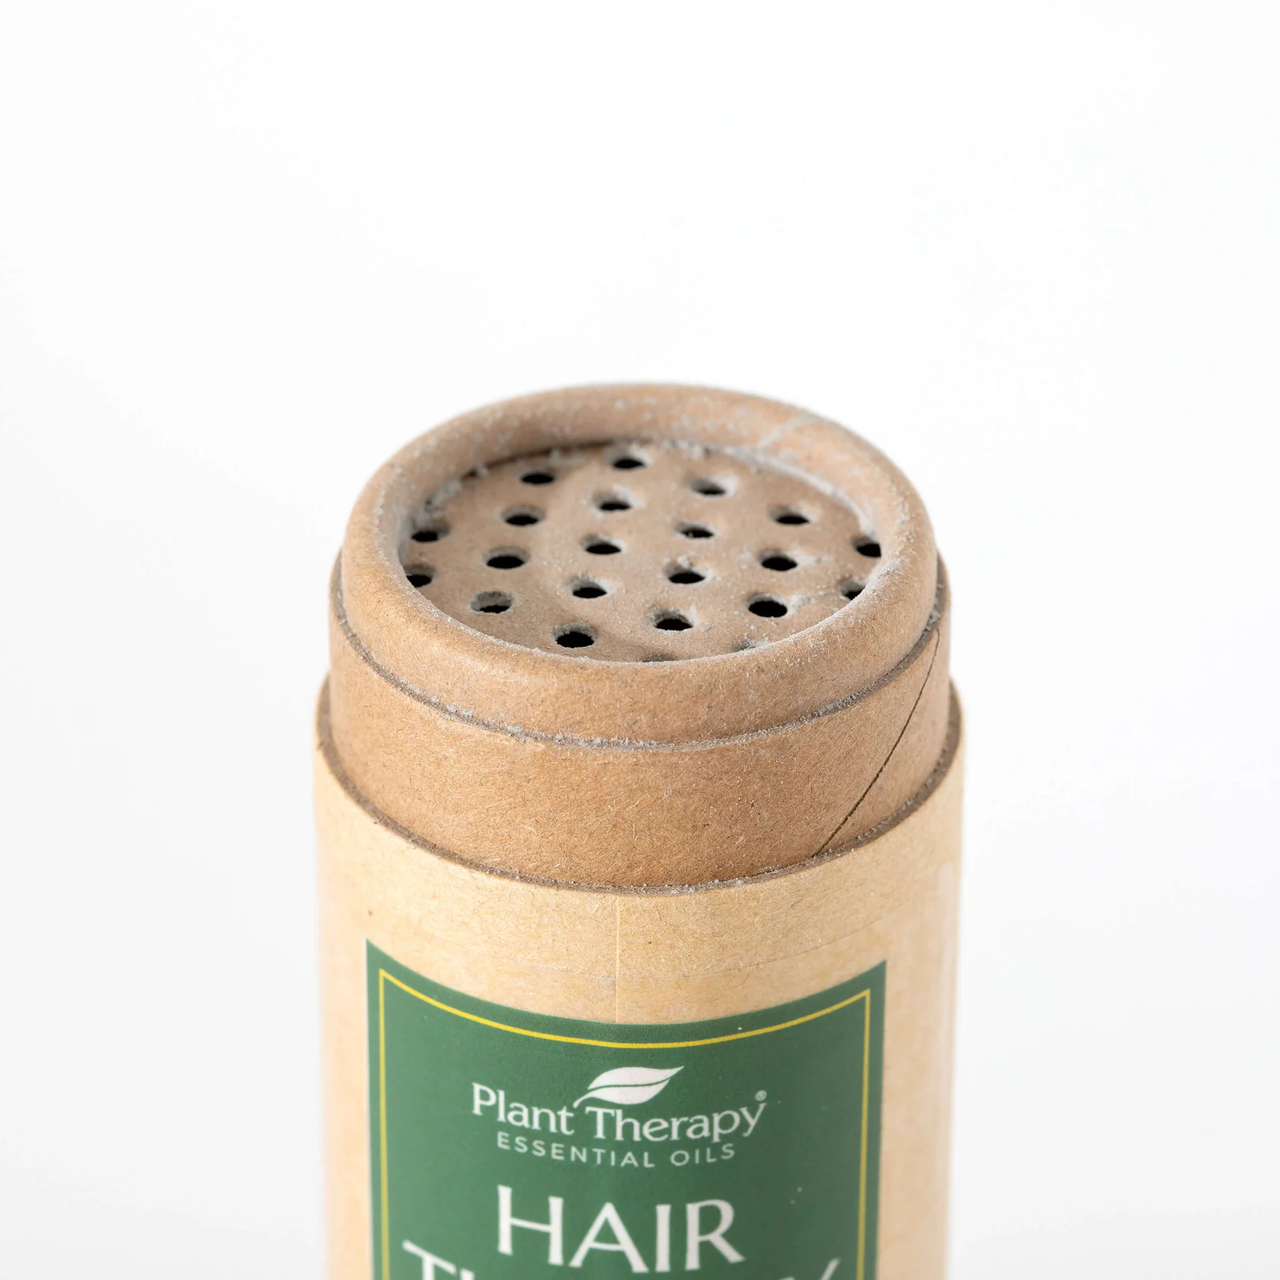 Hair Therapy Dry Shampoo - Plant Therapy